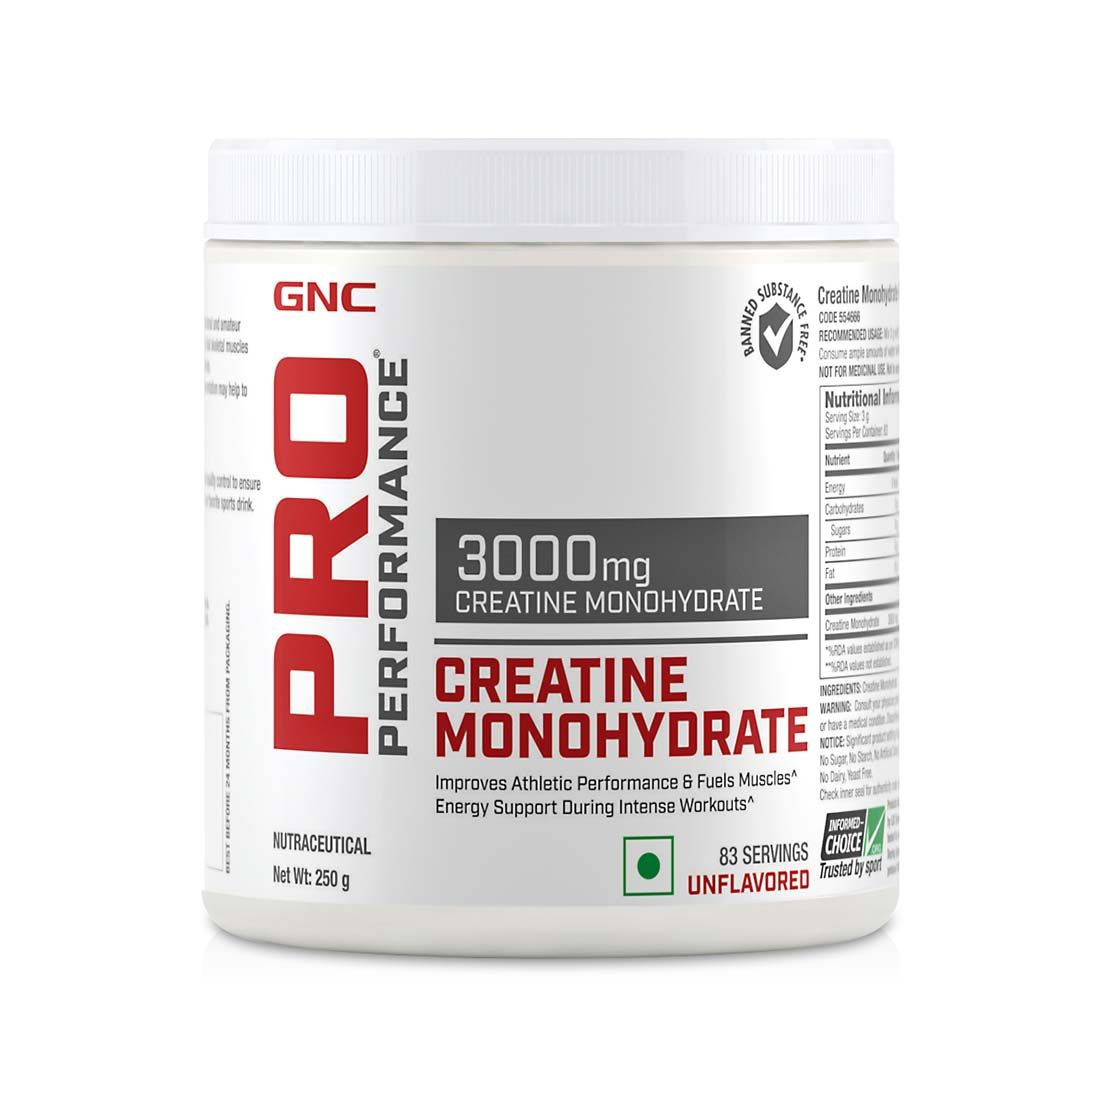 GNC Pro Performance Creatine Monohydrate 3000 mg (Unflavored)